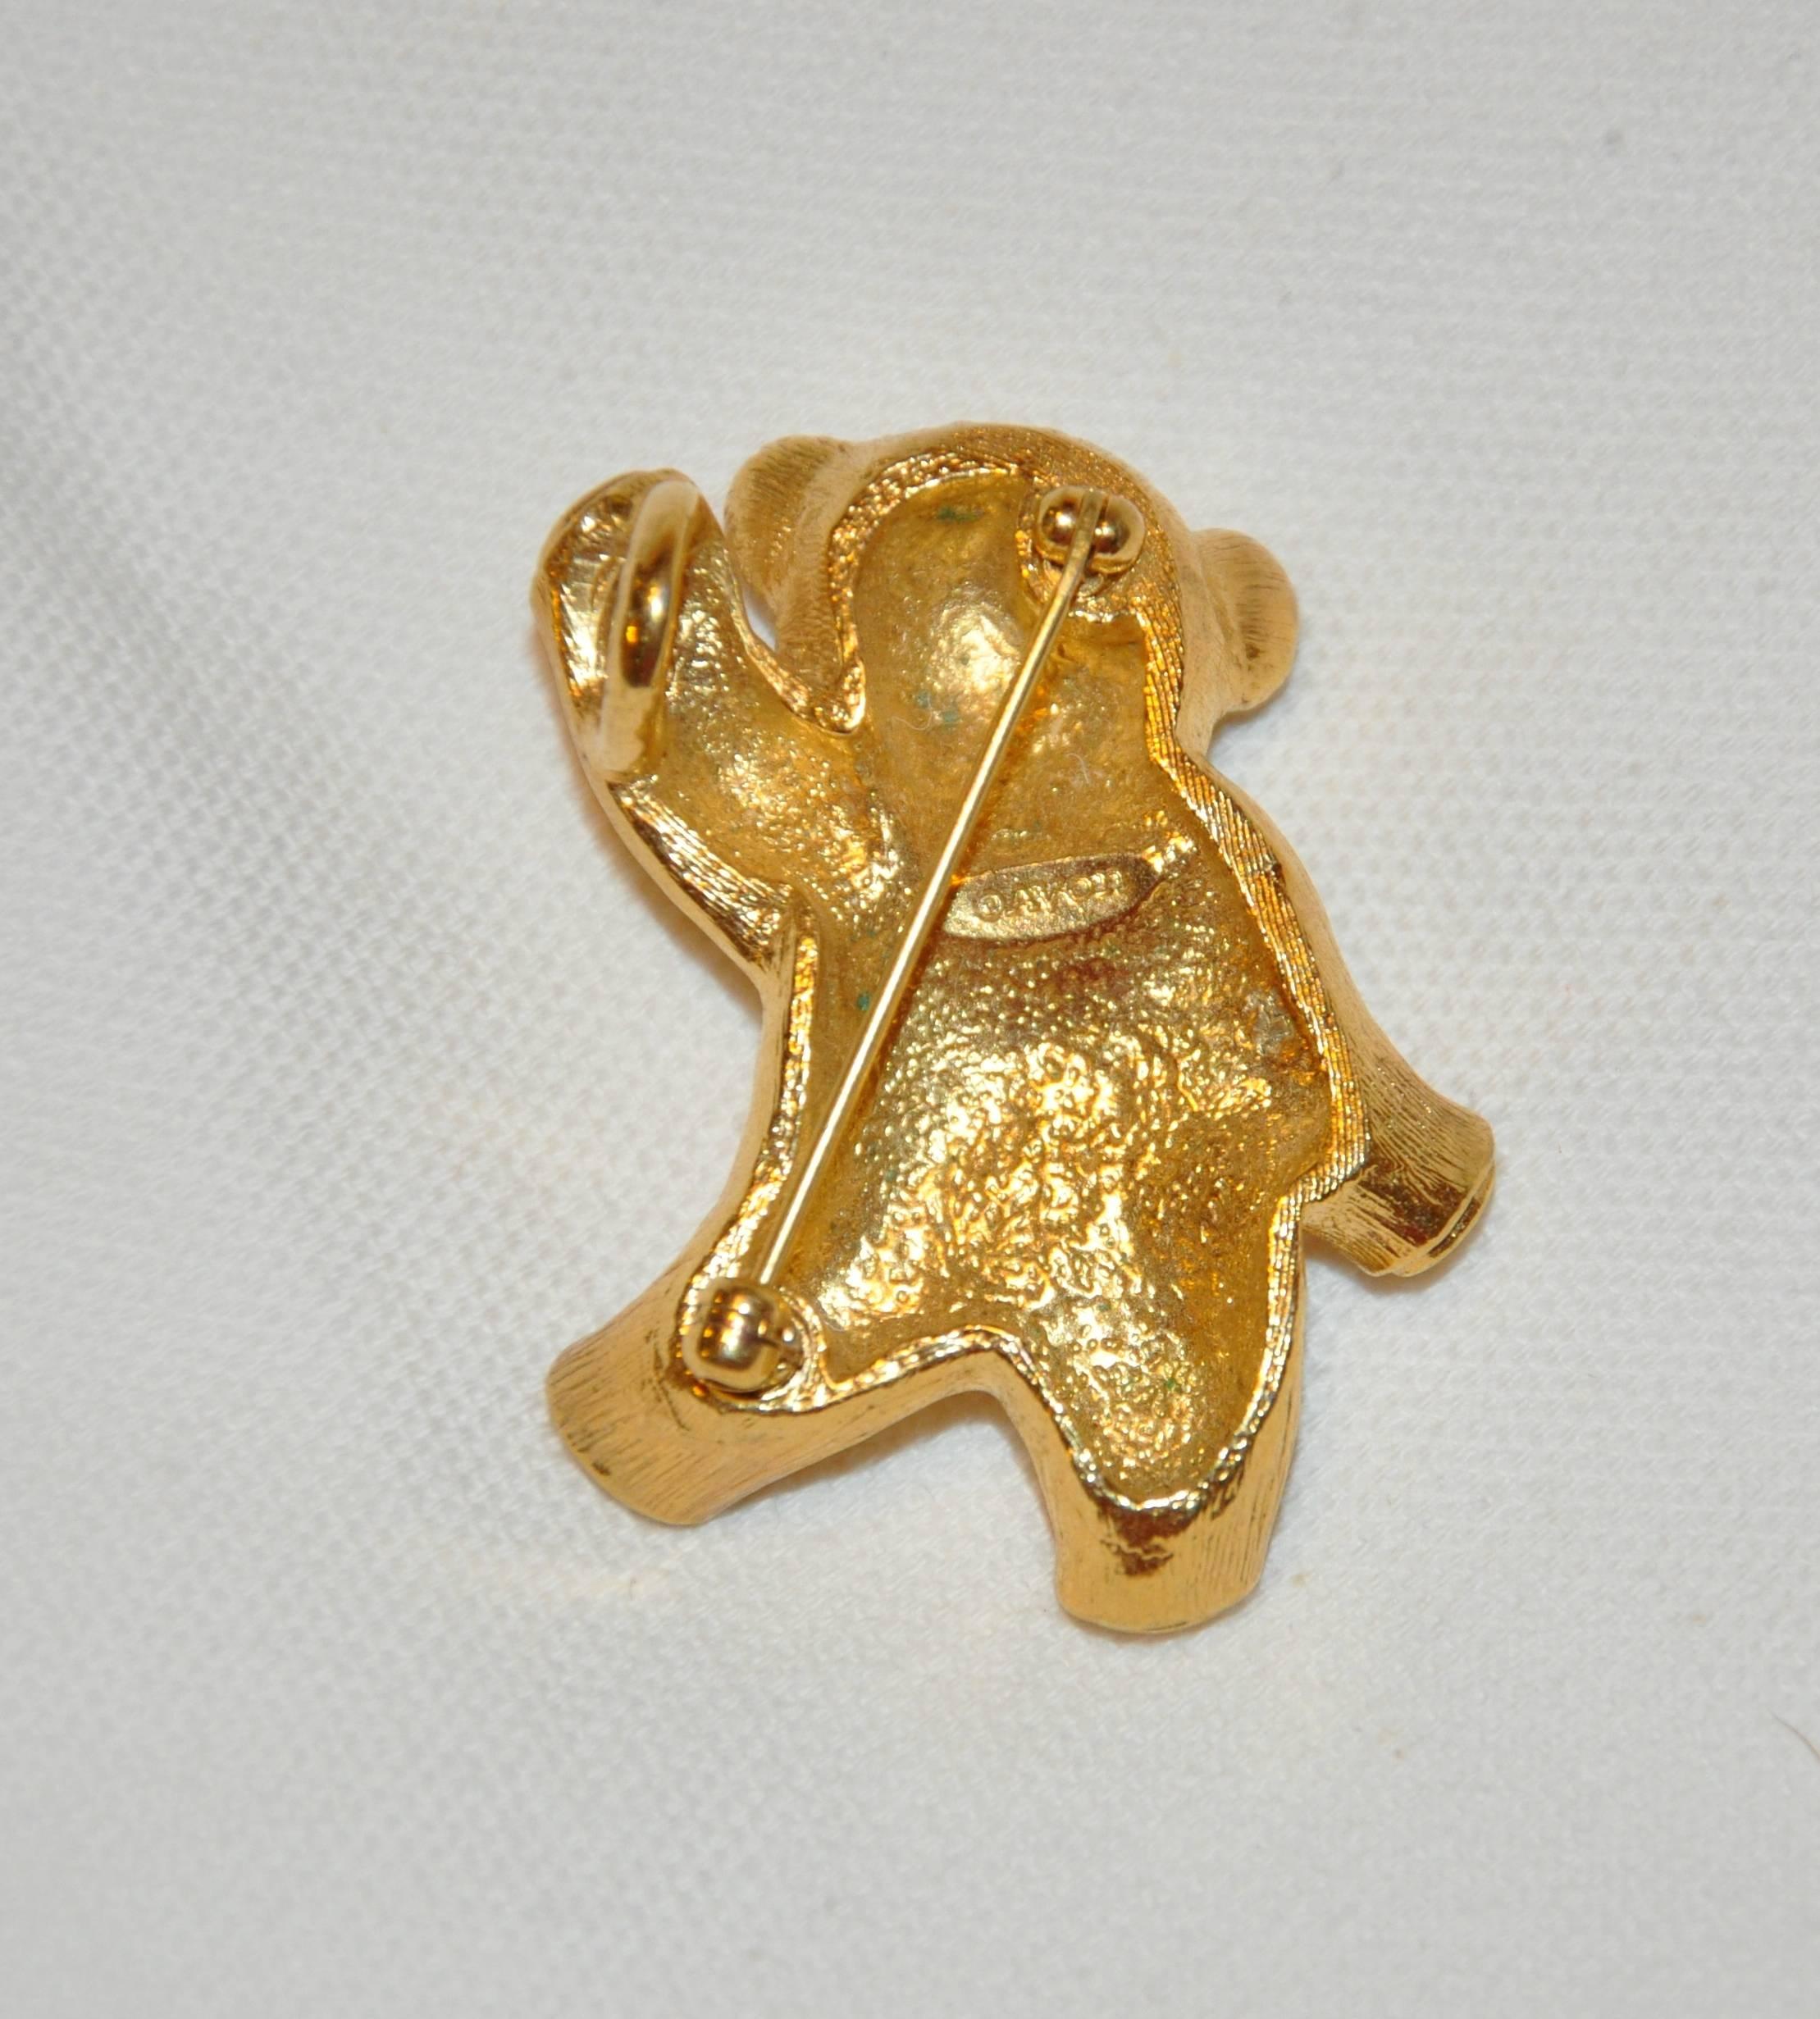        This wonderful large whimsical polished gilded gold vermeil "Teddy" Bear has the option to wear as a brooch as well as a pendant. This whimsical Teddy is accented with multi faux diamonds and measures 1 6/8 inches in length, width